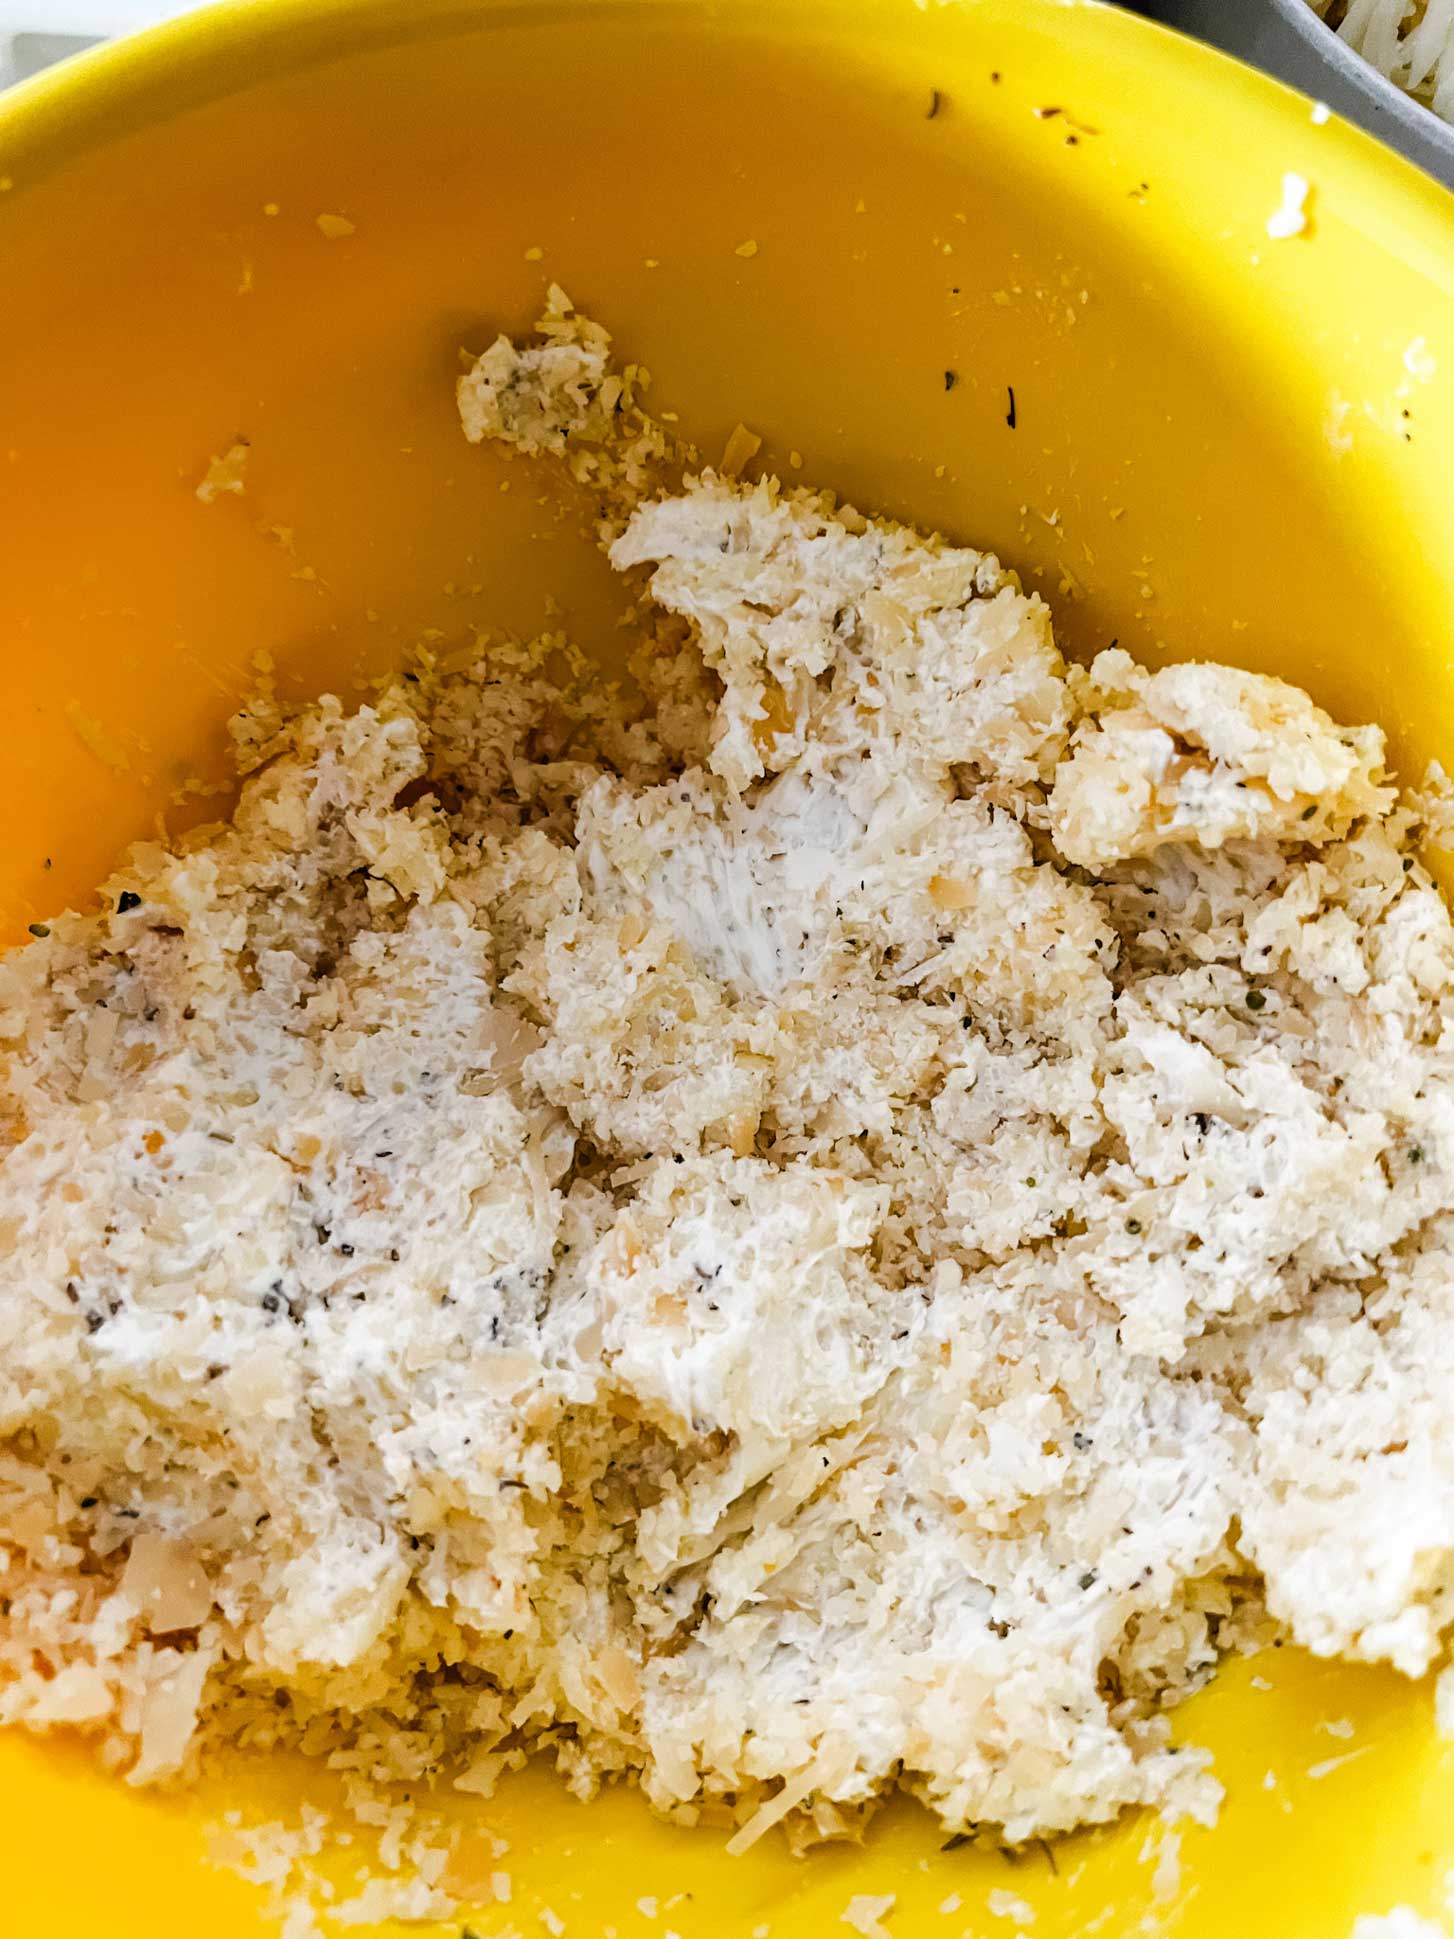 A mixture of cream cheese, parmesan cheese, and seasonings in a yellow bowl.